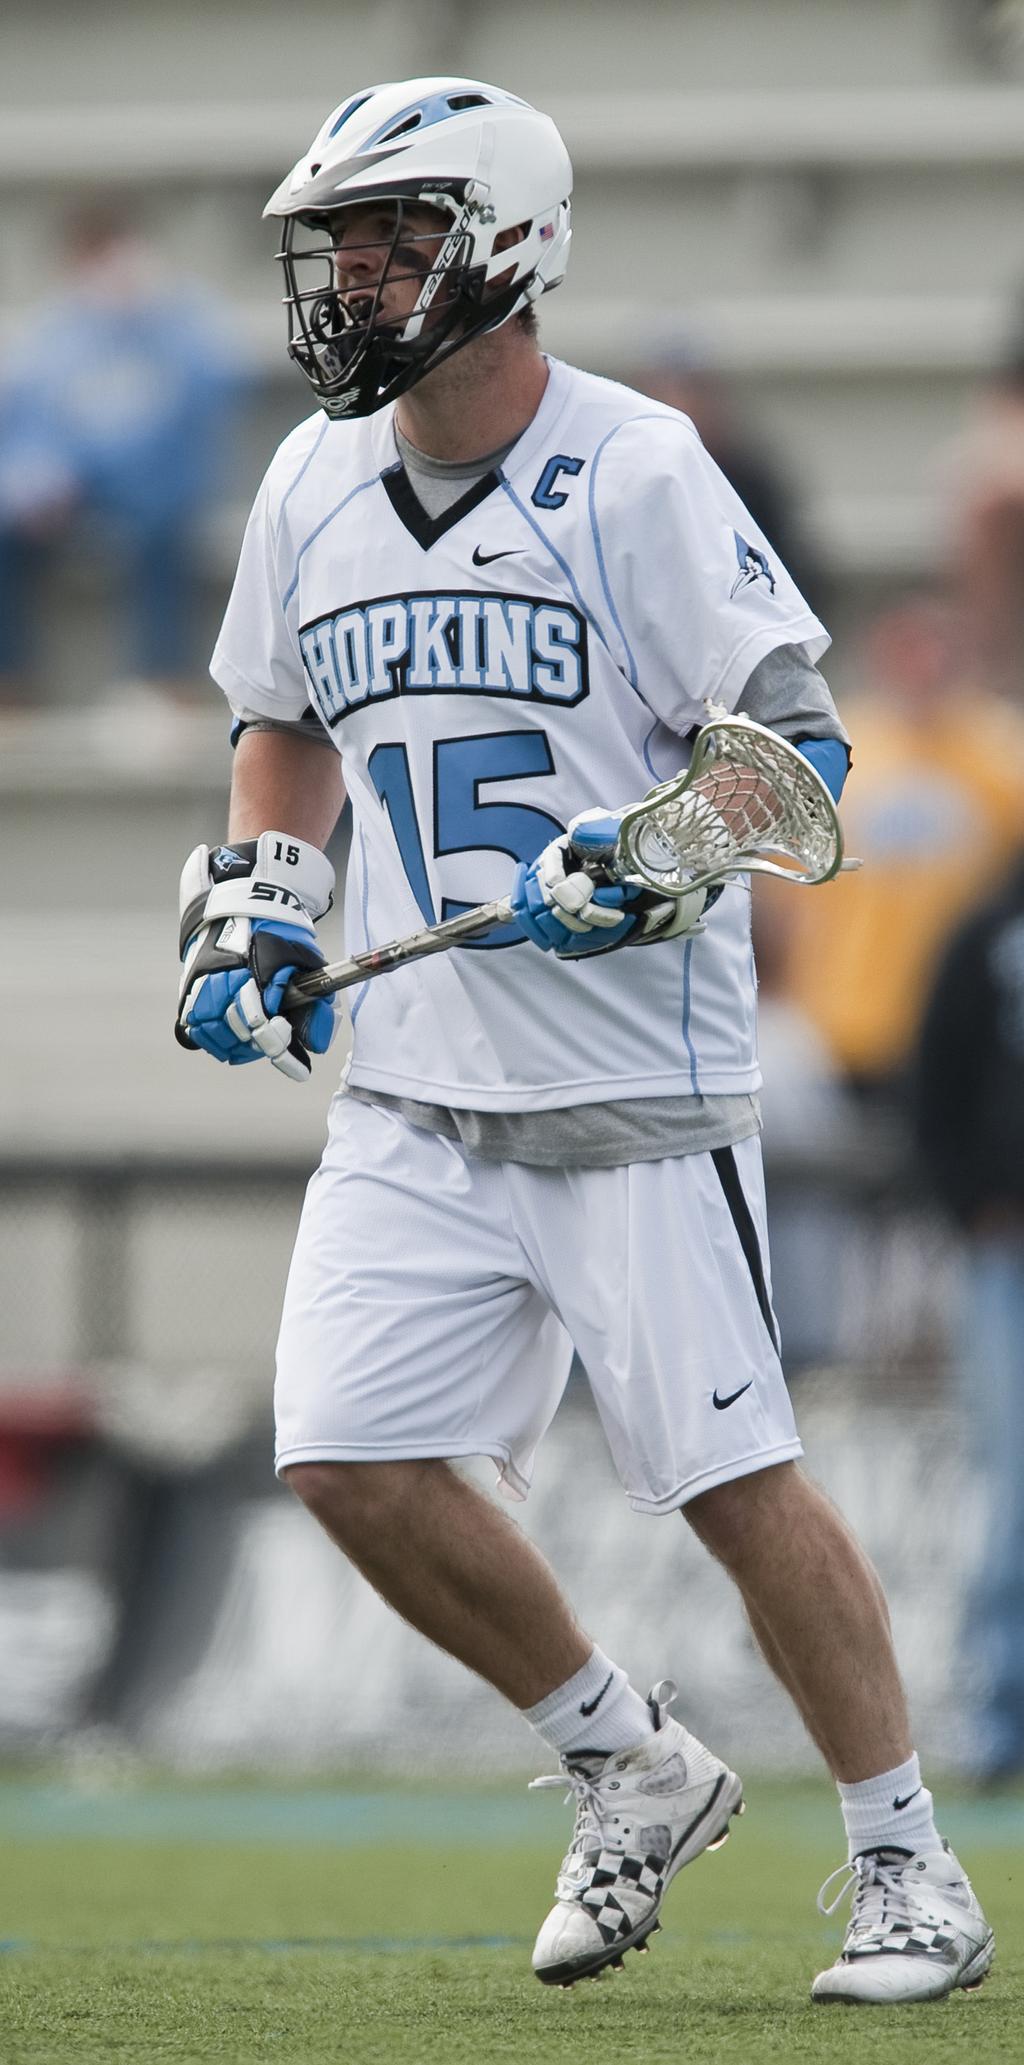 Position Tradition - Midfield Johns Hopkins has had at least one midfielder earn All-America honors every year since 1947.